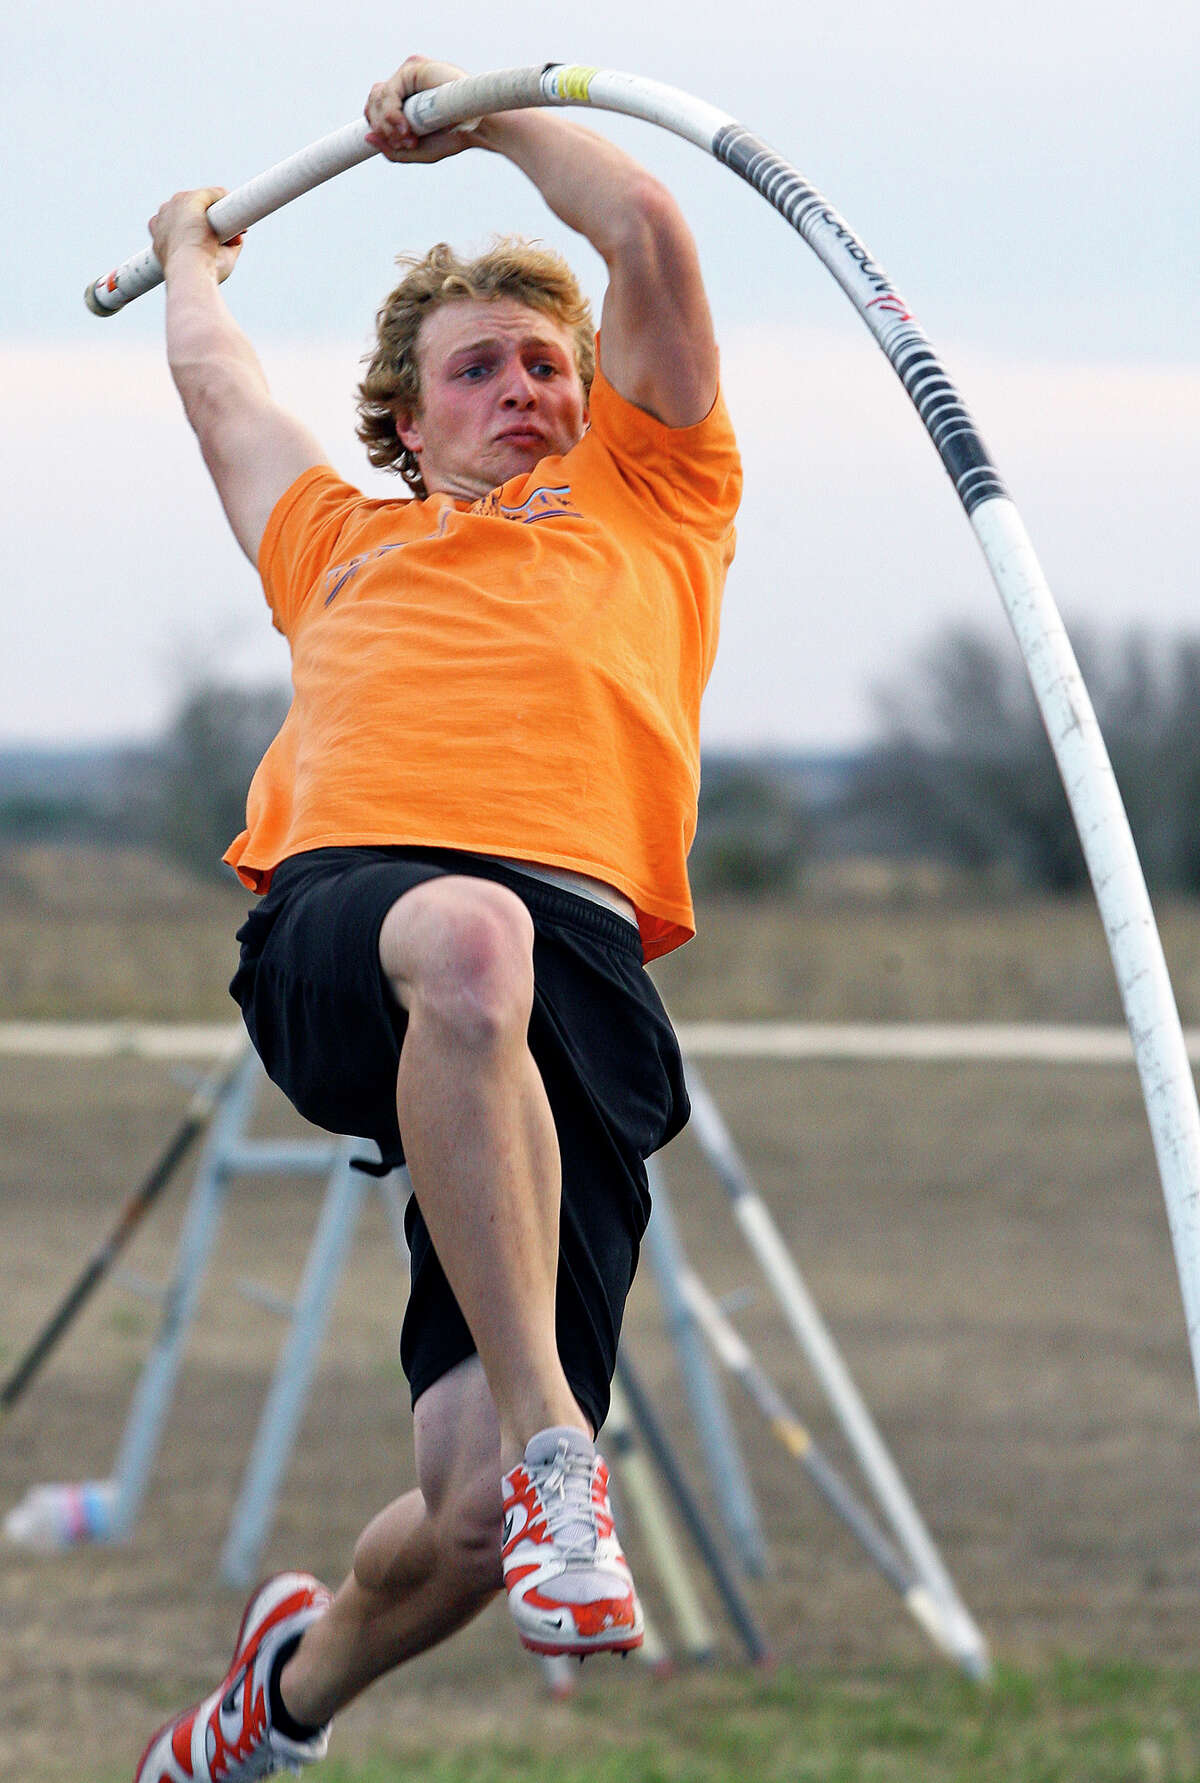 Logan Cunningham drives hard into his jump as he practices pole vaulting technique at Jim Dicksons facility on Feb. 18, 2009.